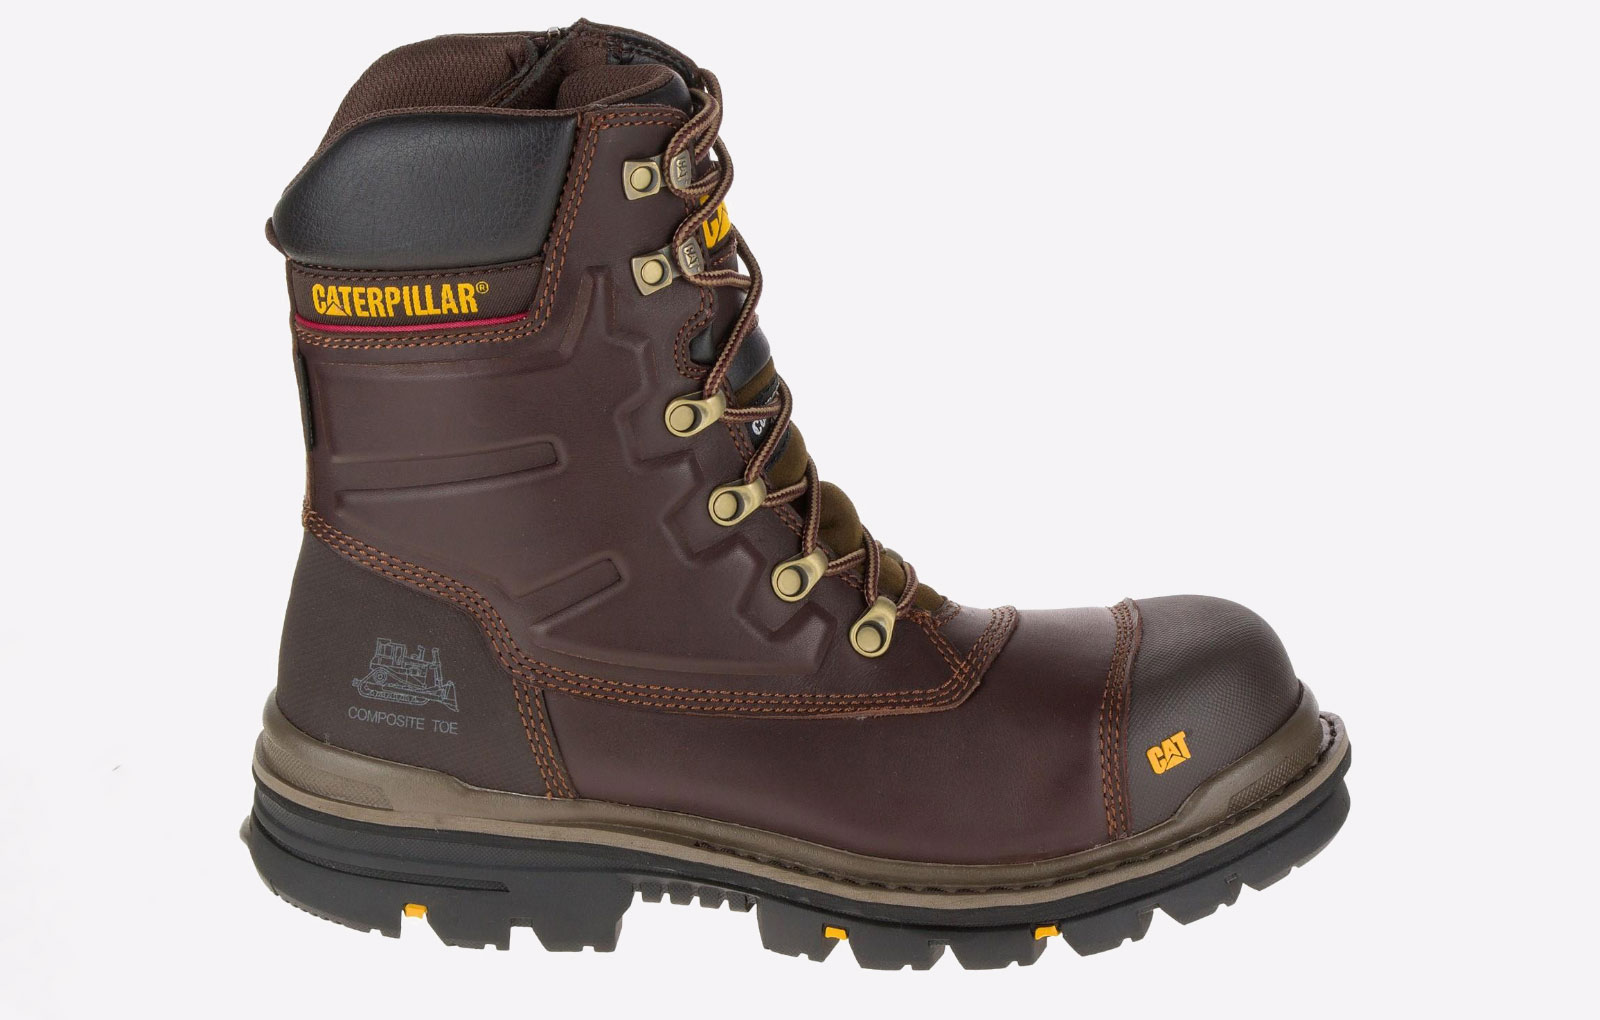 Caterpillar Premier Leather Waterproof Safety Boot Mens - GRD-32959-56325-10